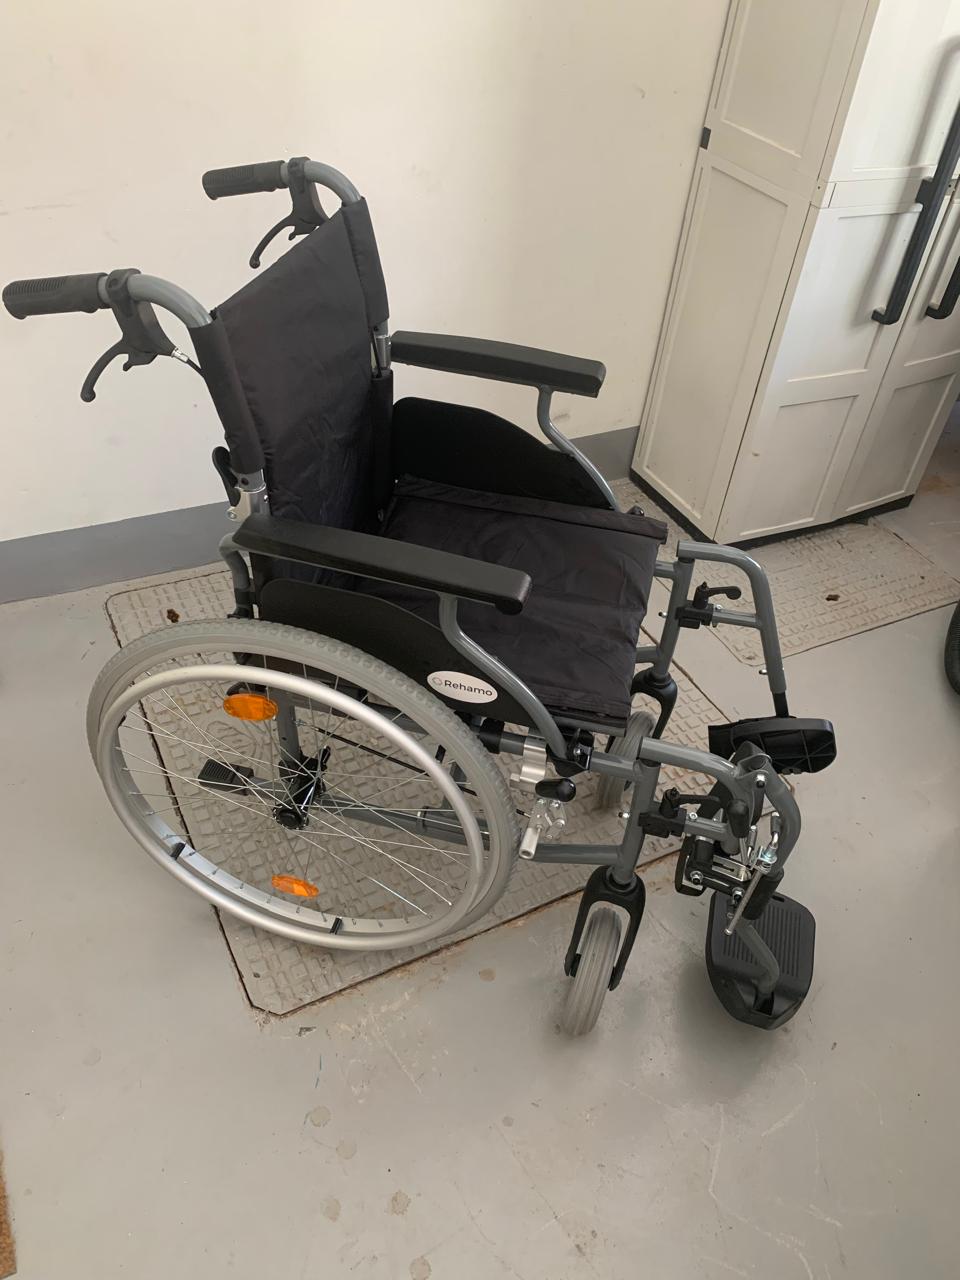 Wheel Chair with Leg Extension - Used Few Times